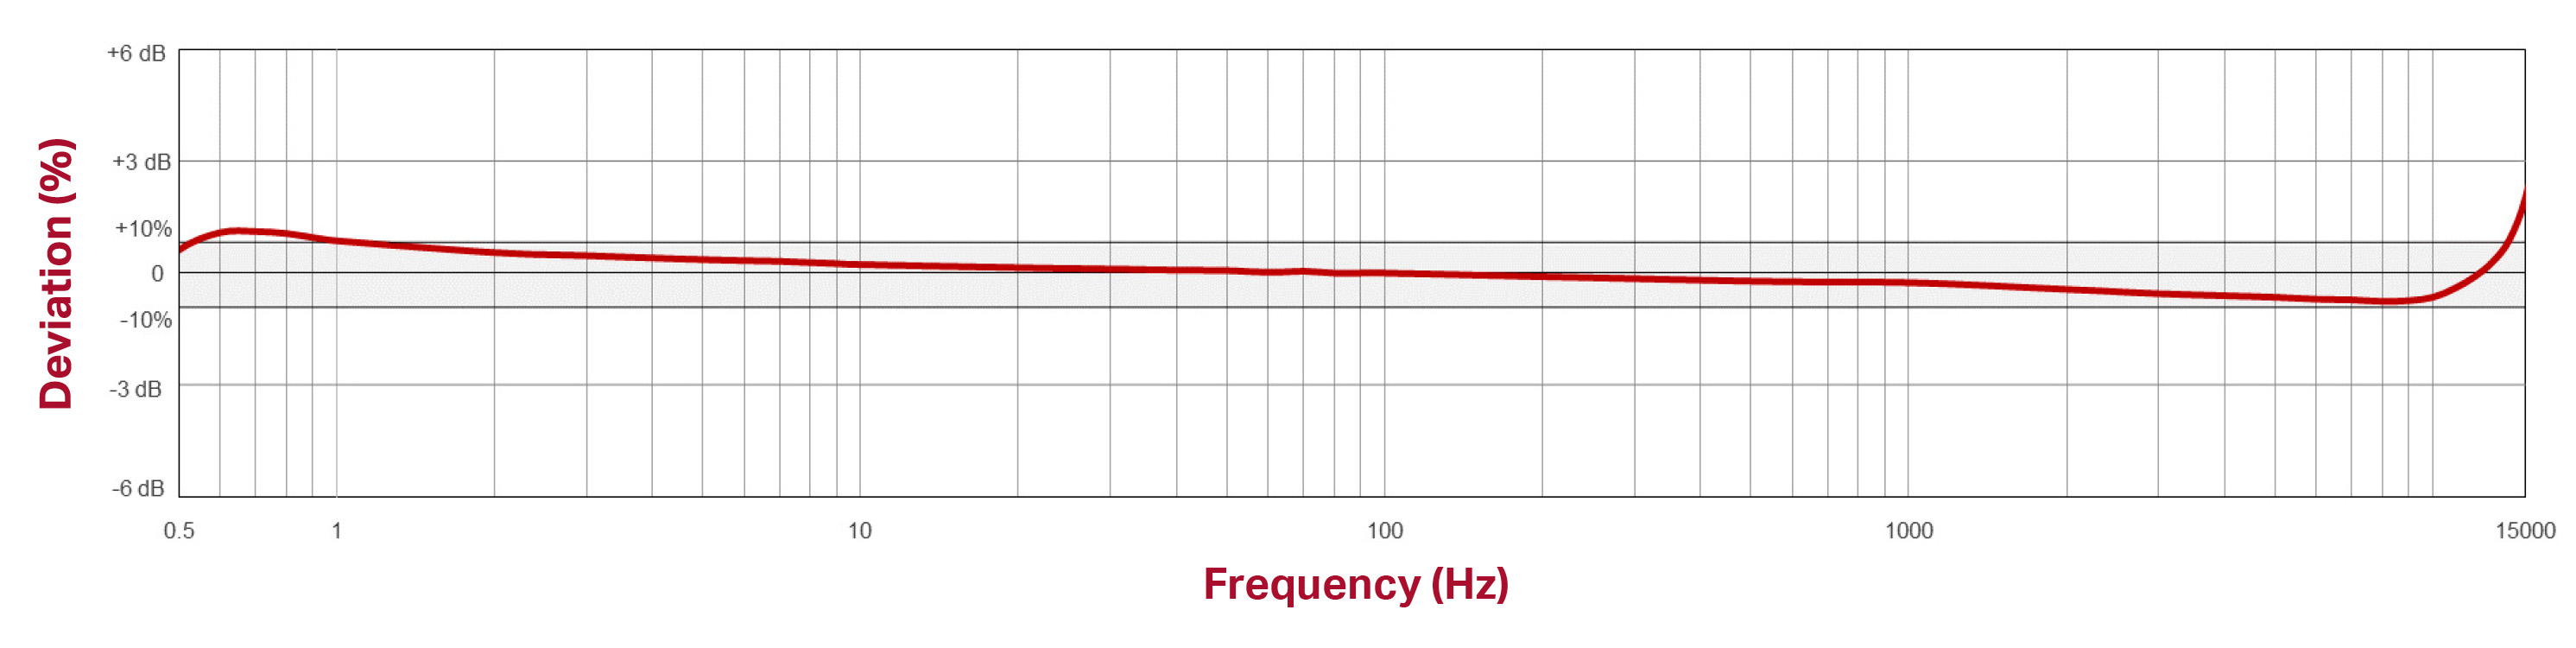 line graph showing the frequency response of an AC102 sensor by charting Deviation (%) on the Y axis and Frequency (Hz) on the X axis